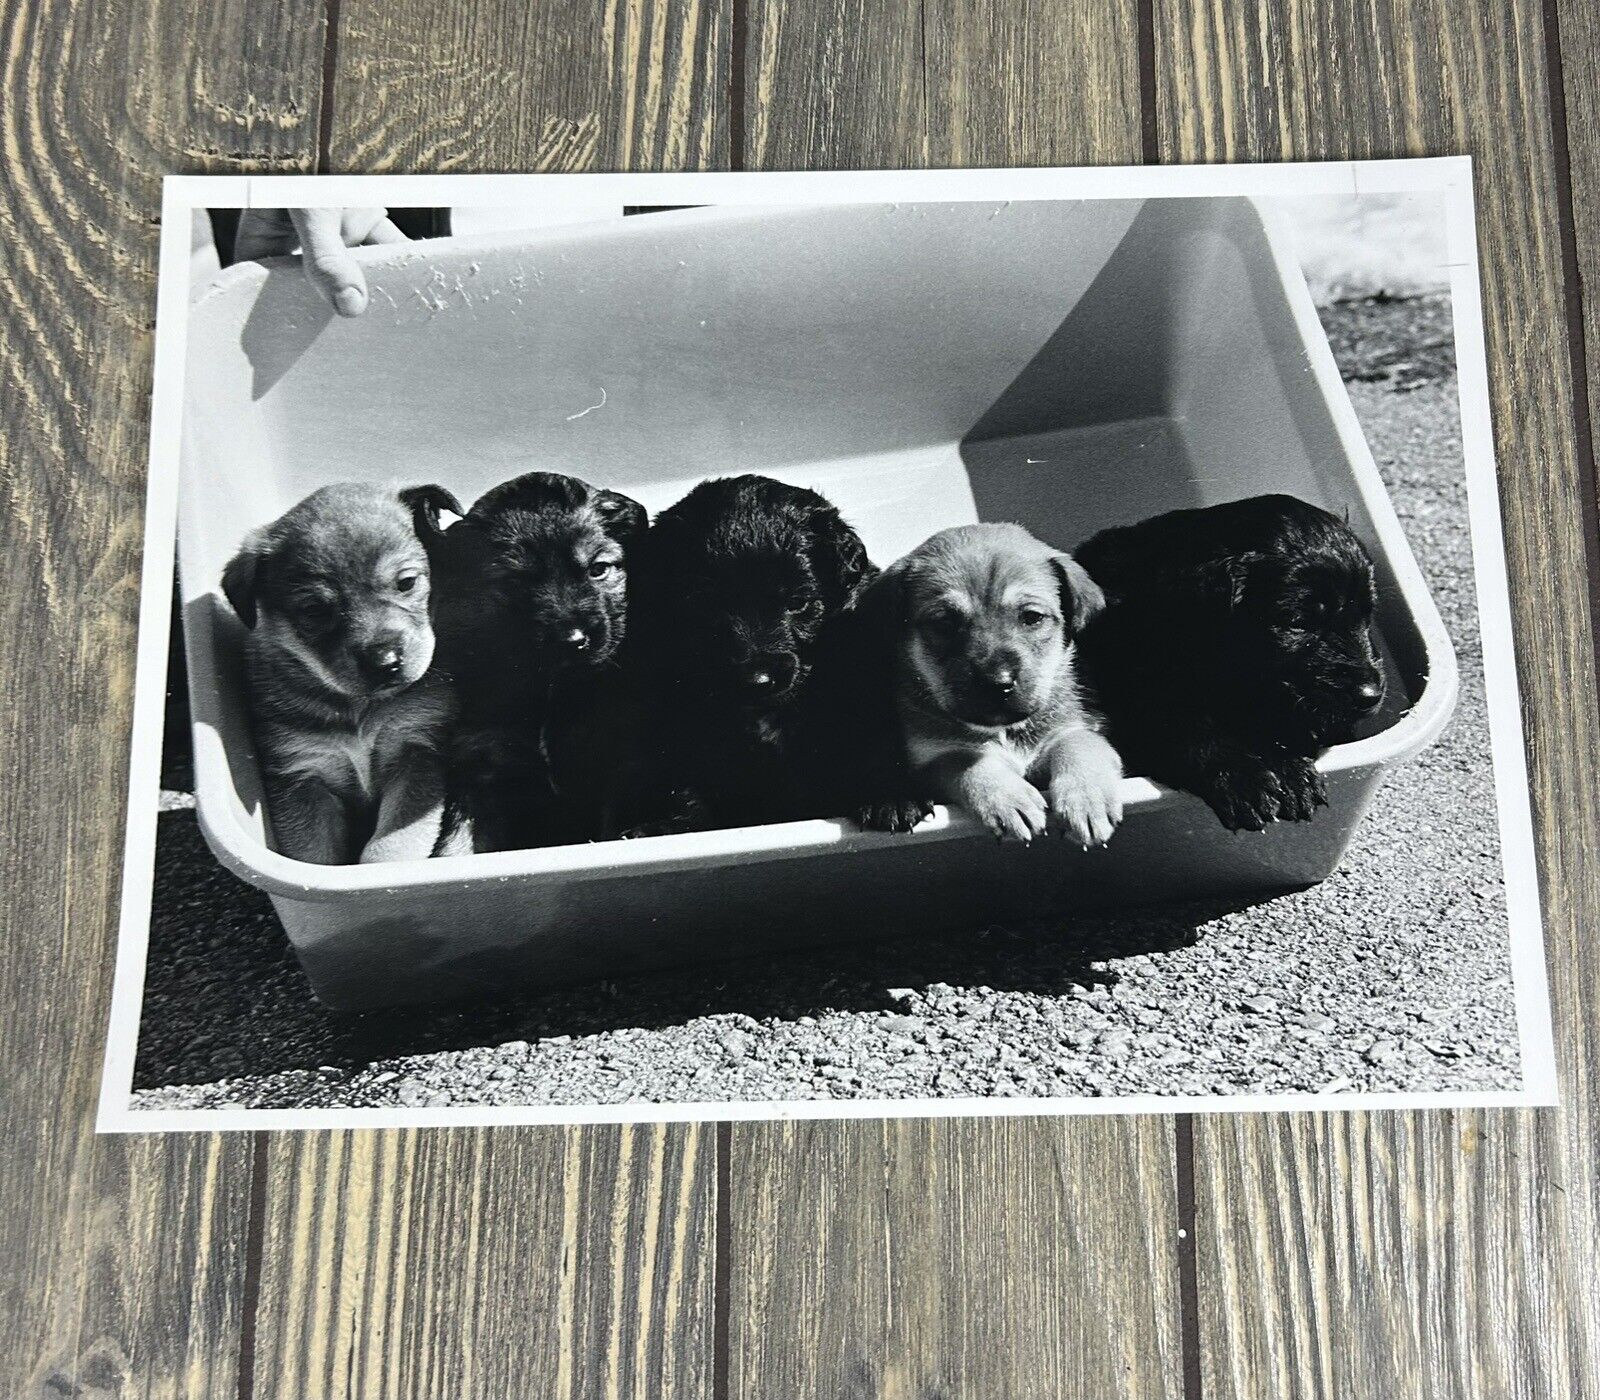 Vintage Don’s Pet 5 Puppies In Box Photograph 10” x 7”